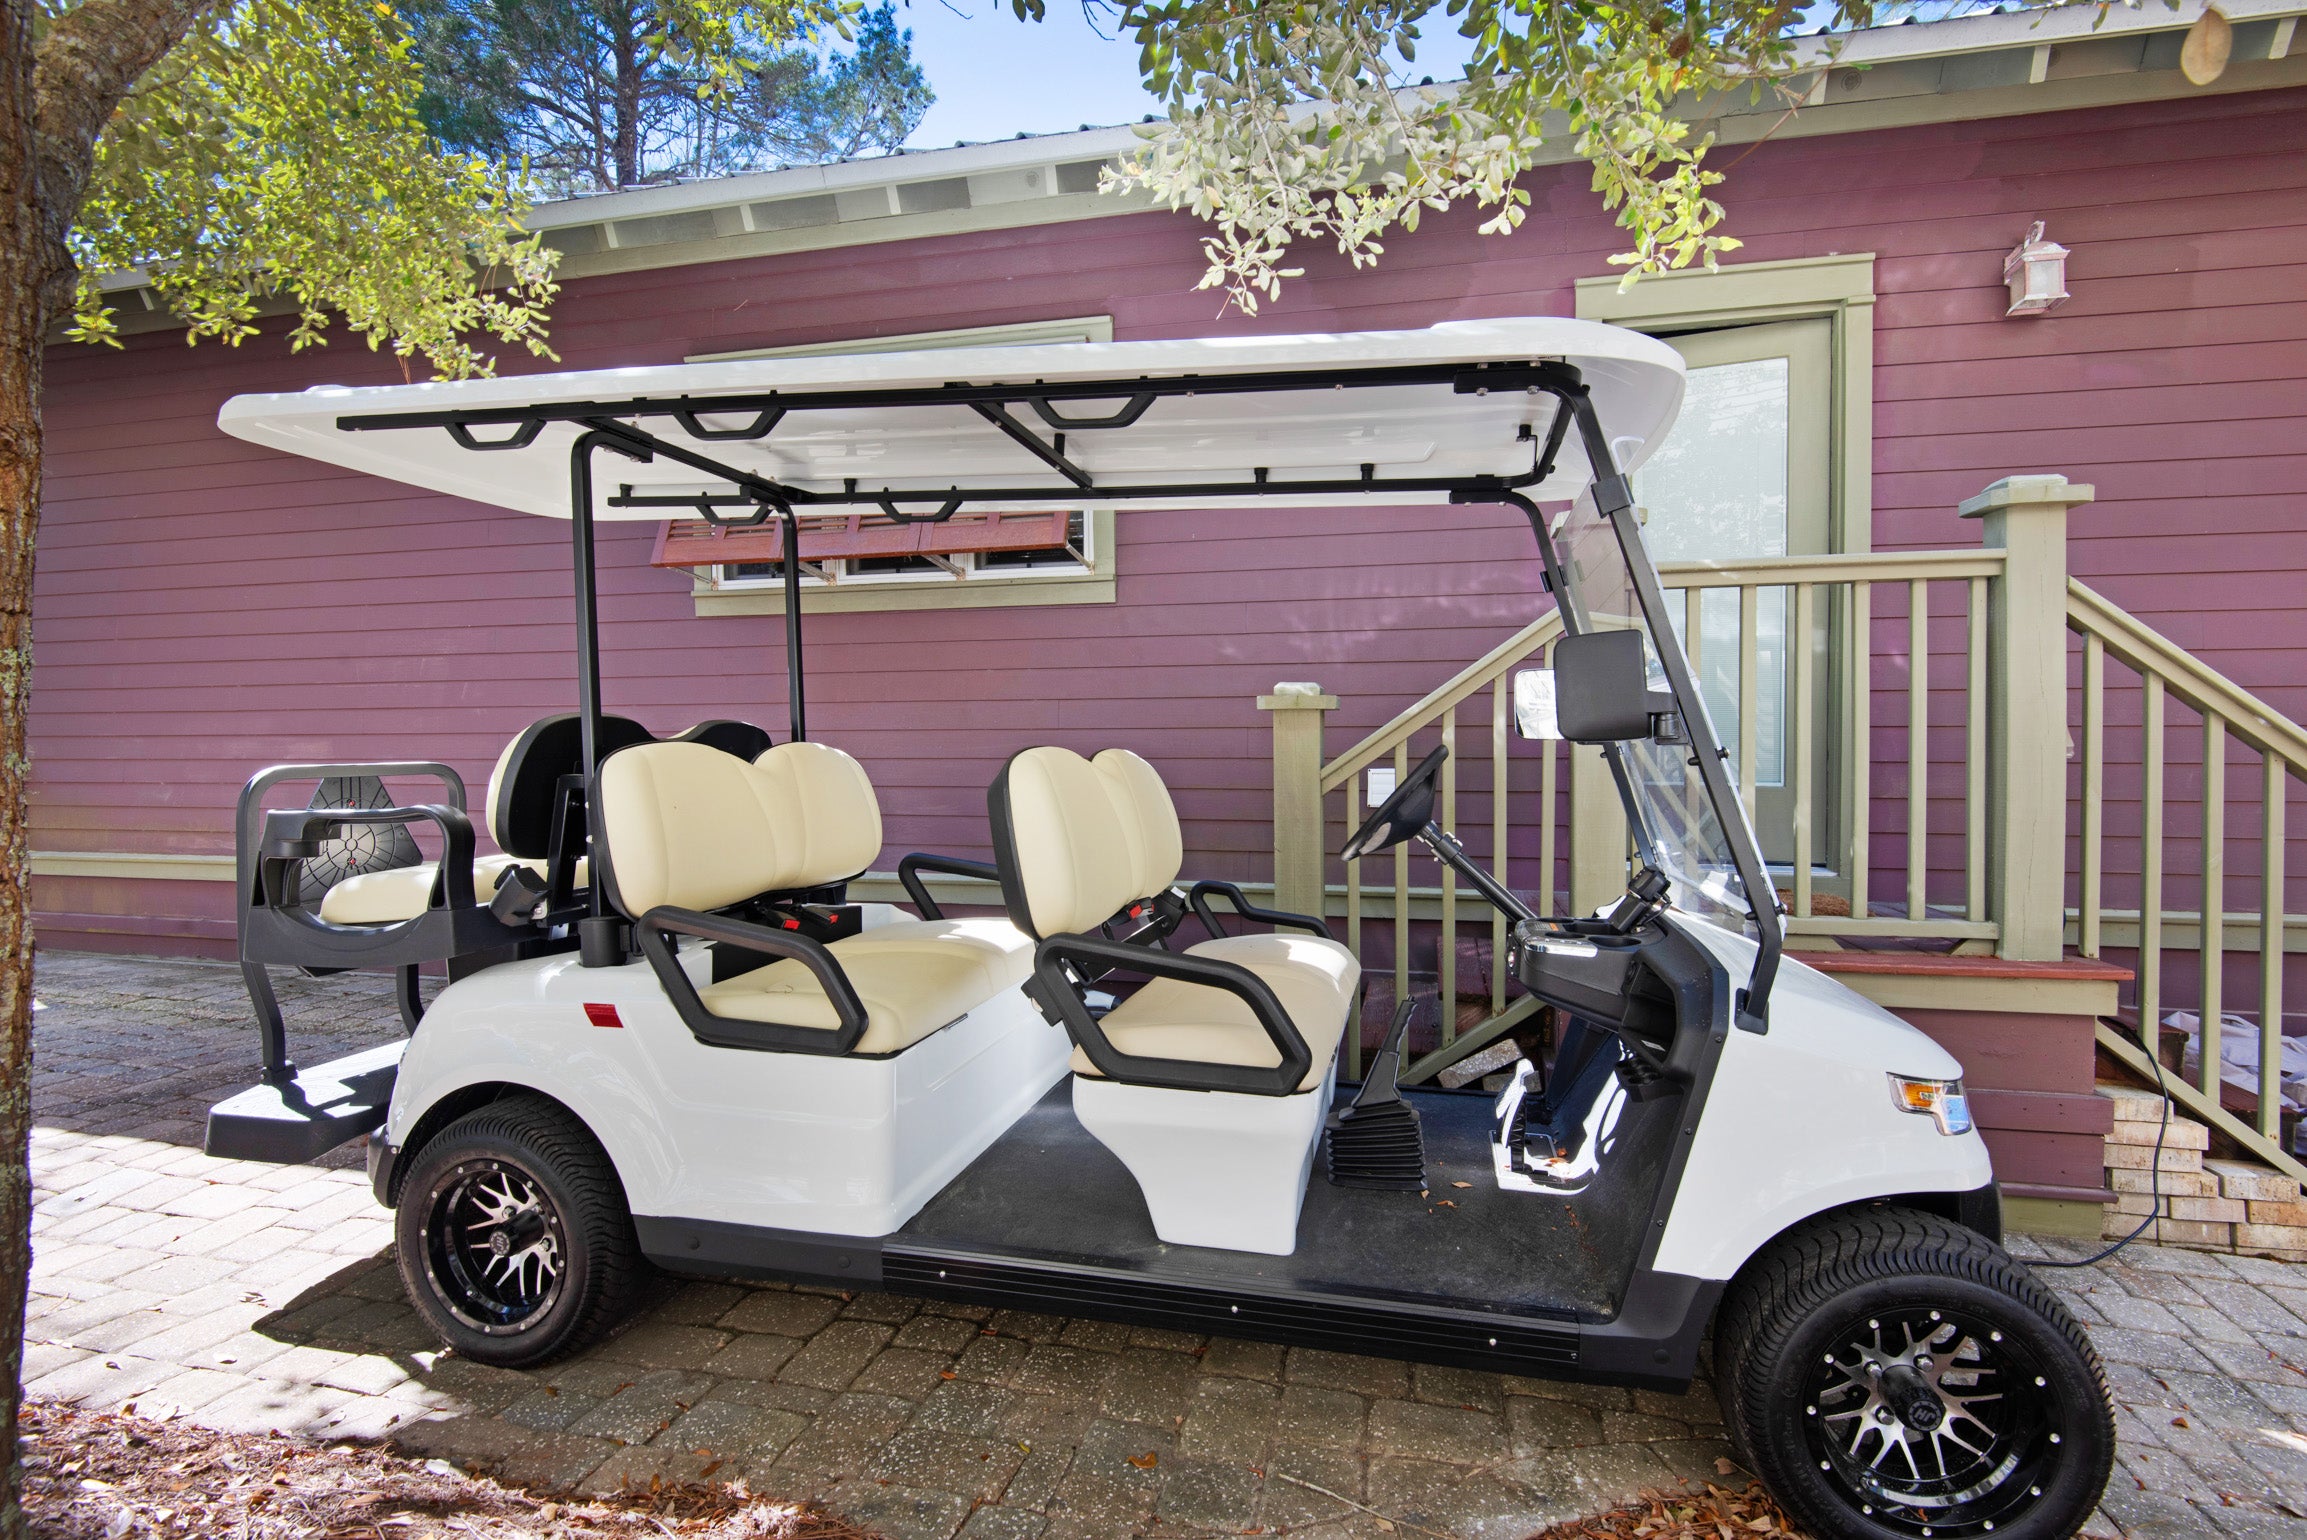 Go for a ride on the golf cart!